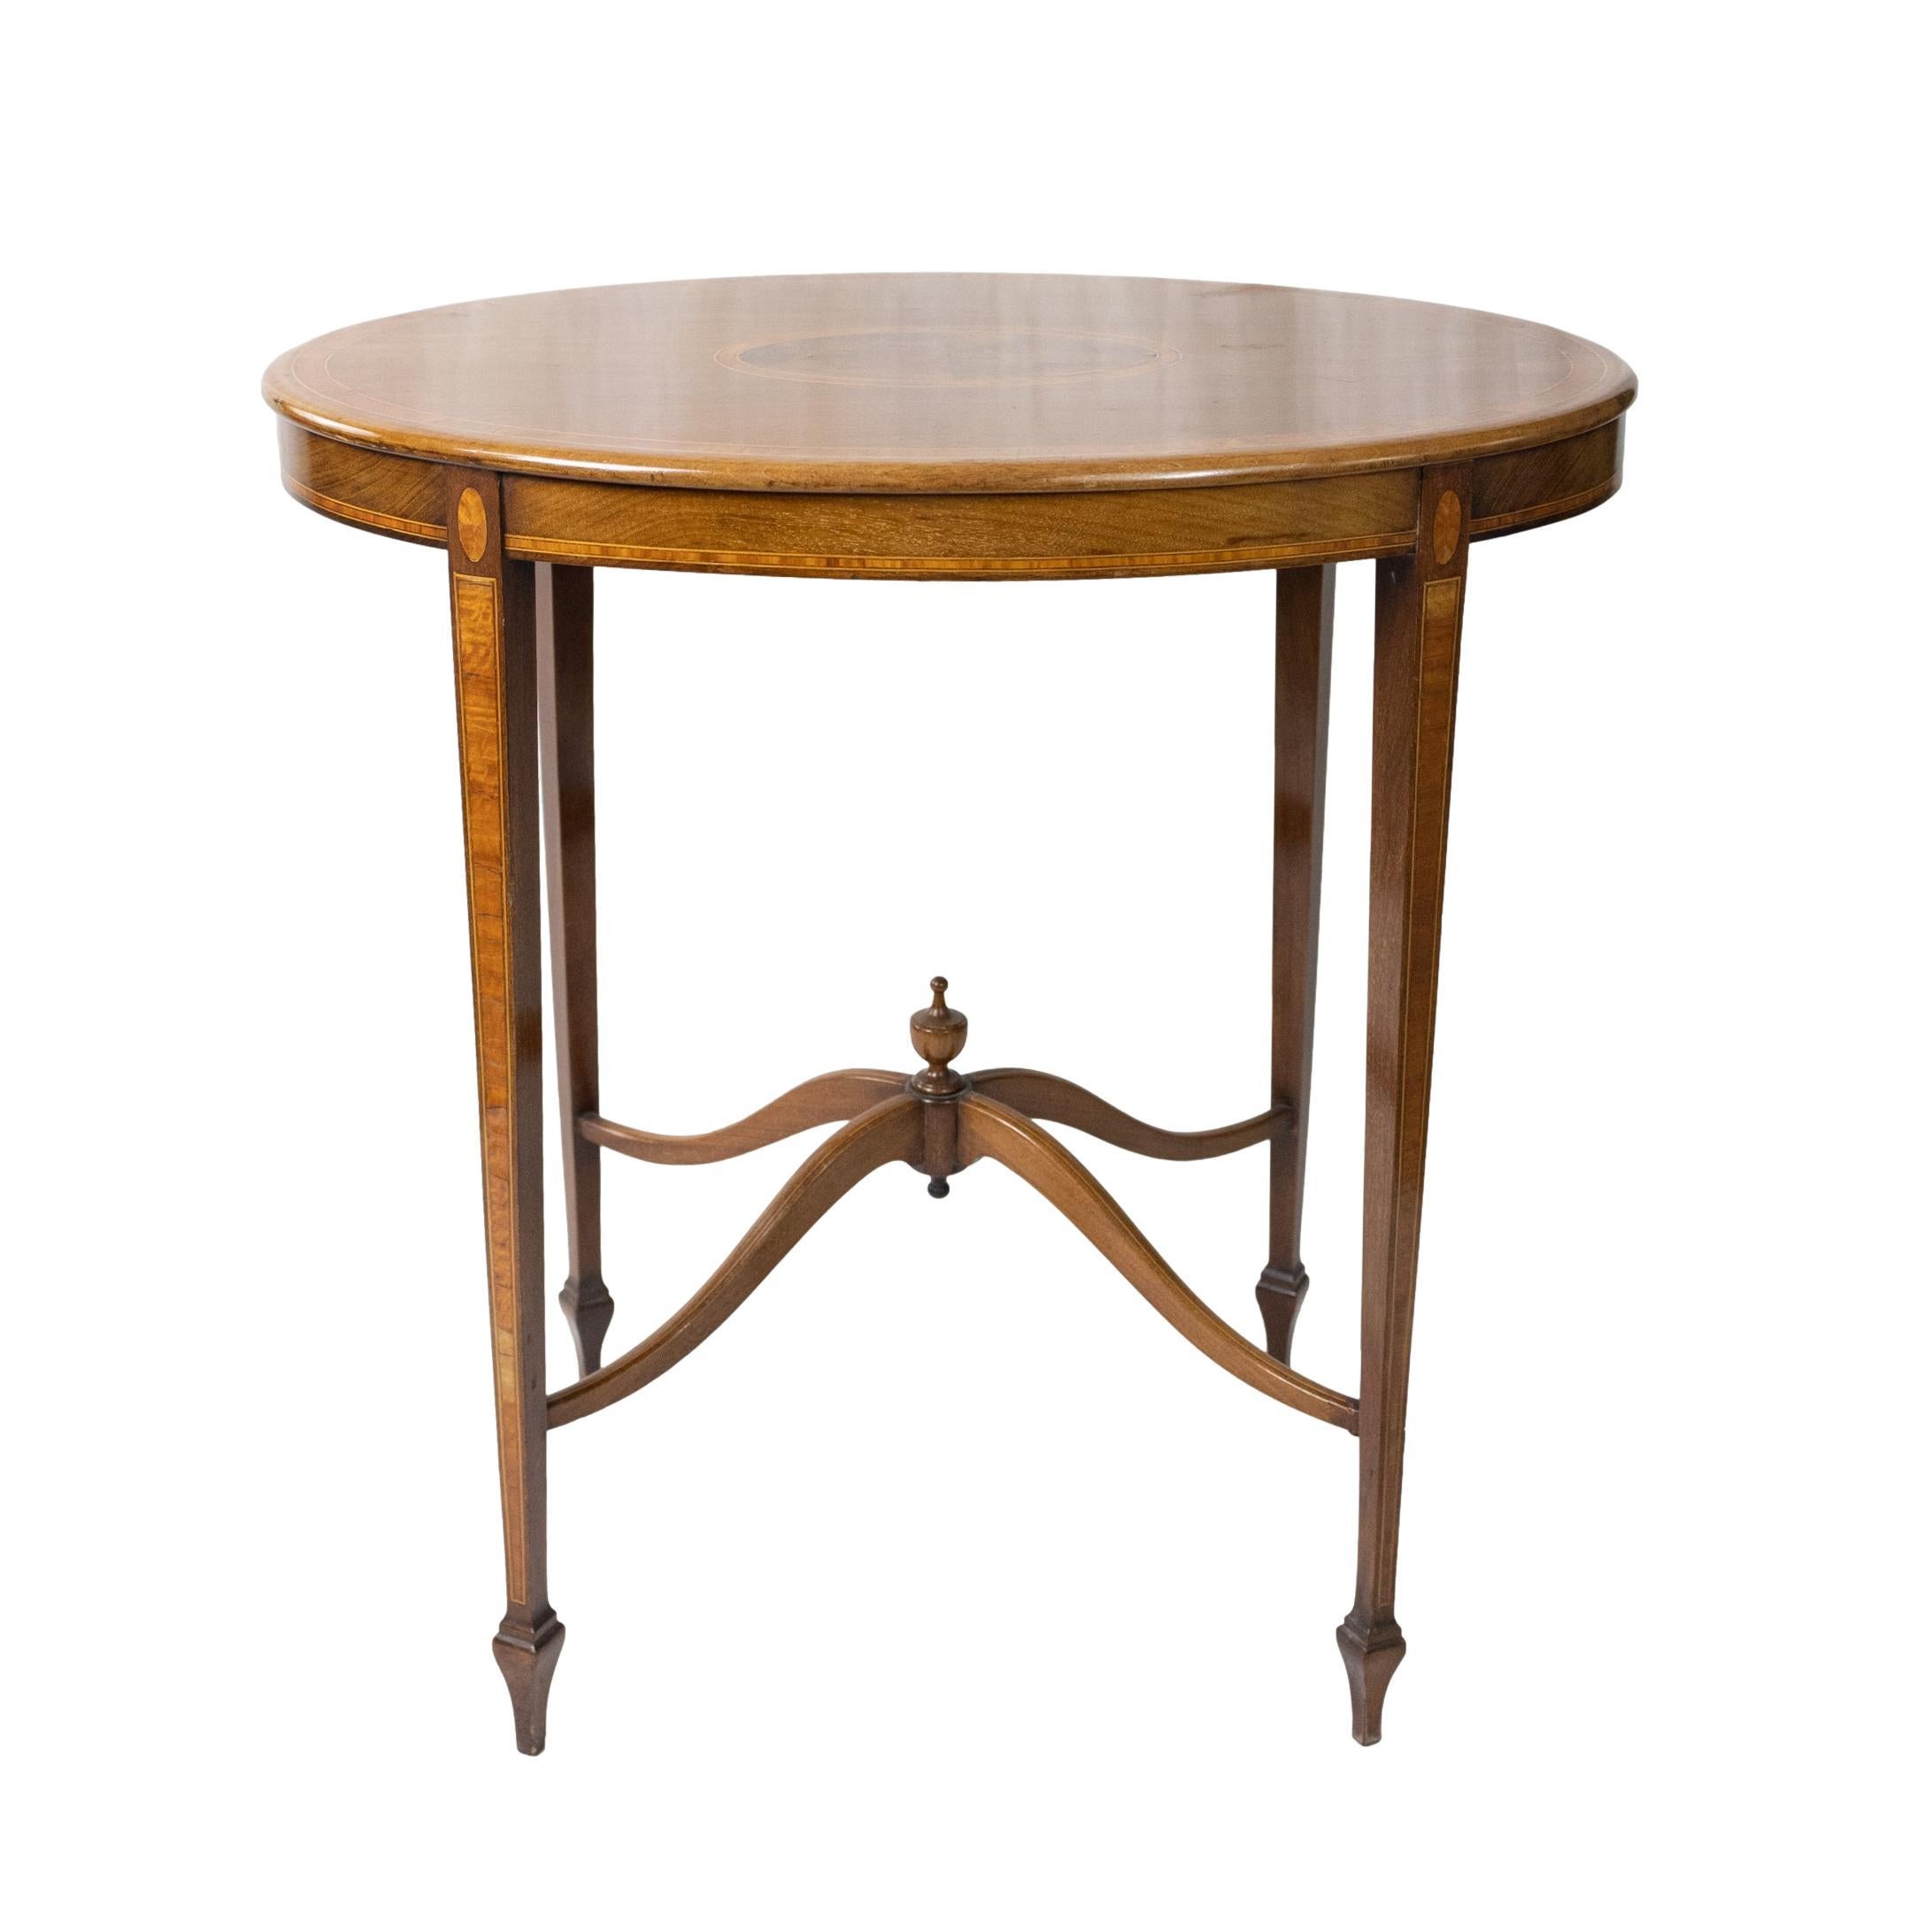 Edwardian Figured Mahogany and Satinwood-Inlaid Oval Occasional Table, English, ca. 1890 For Sale